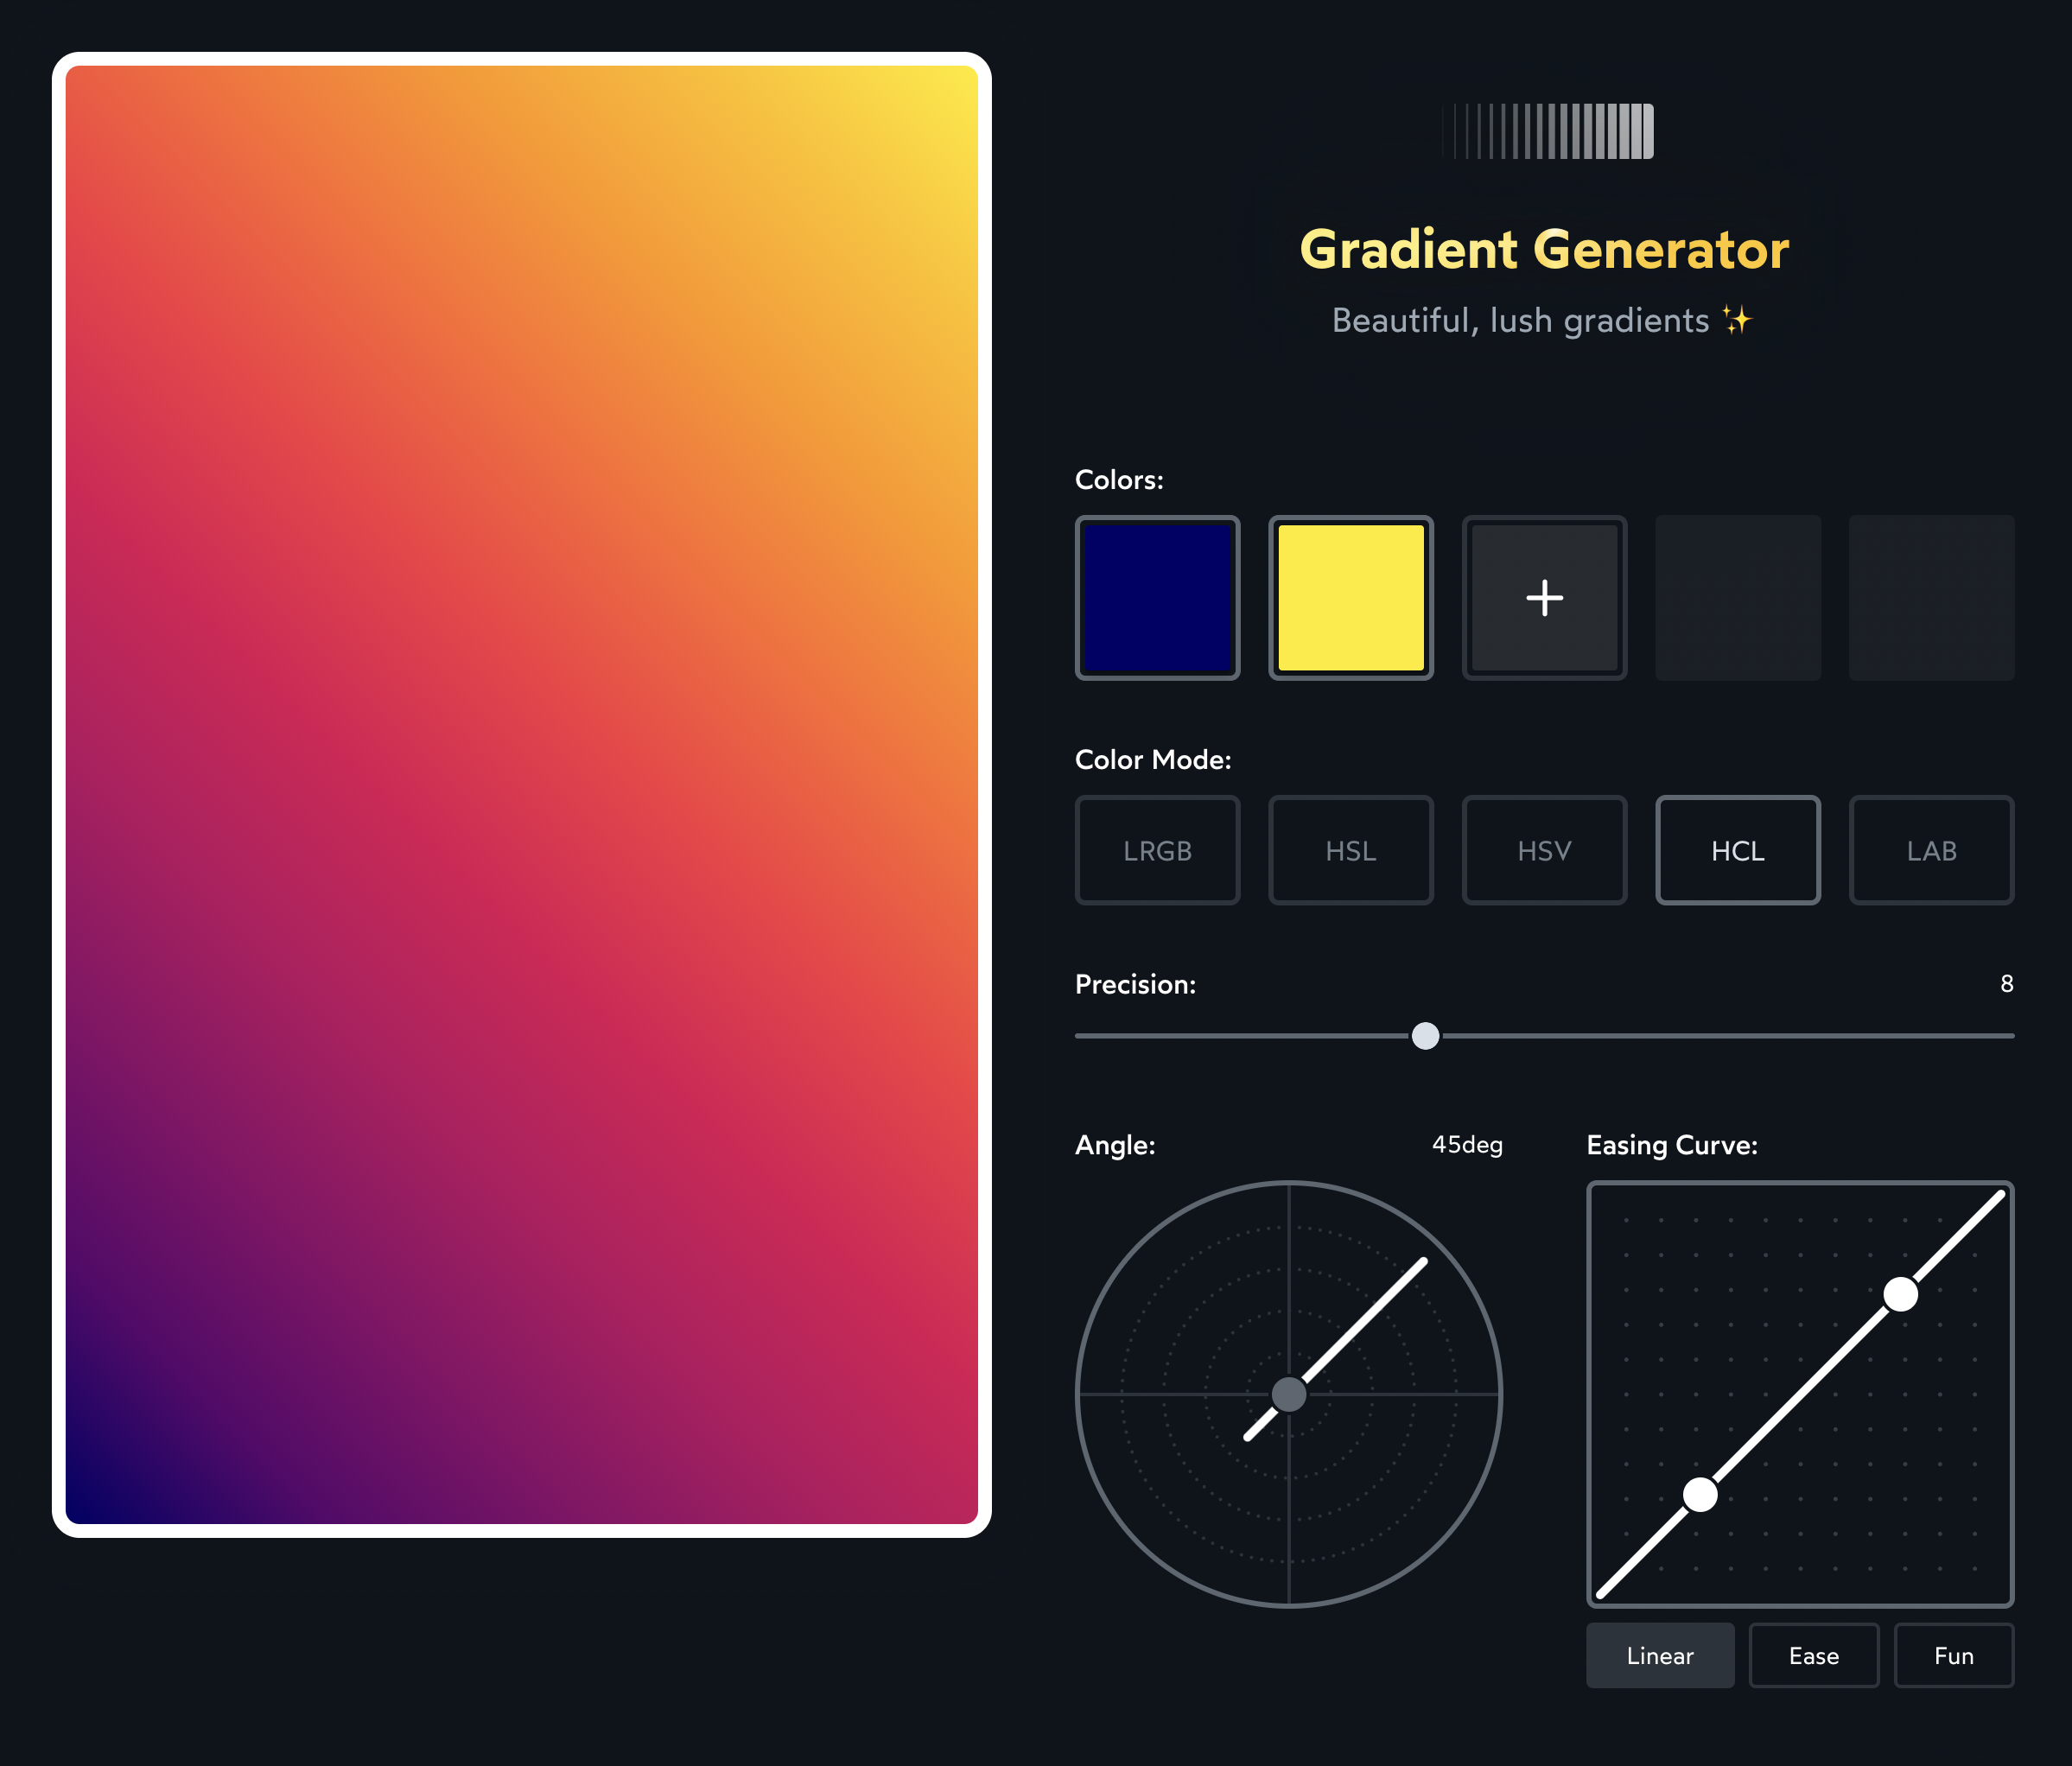 Screenshot of a tool that allows you to customize a gradient